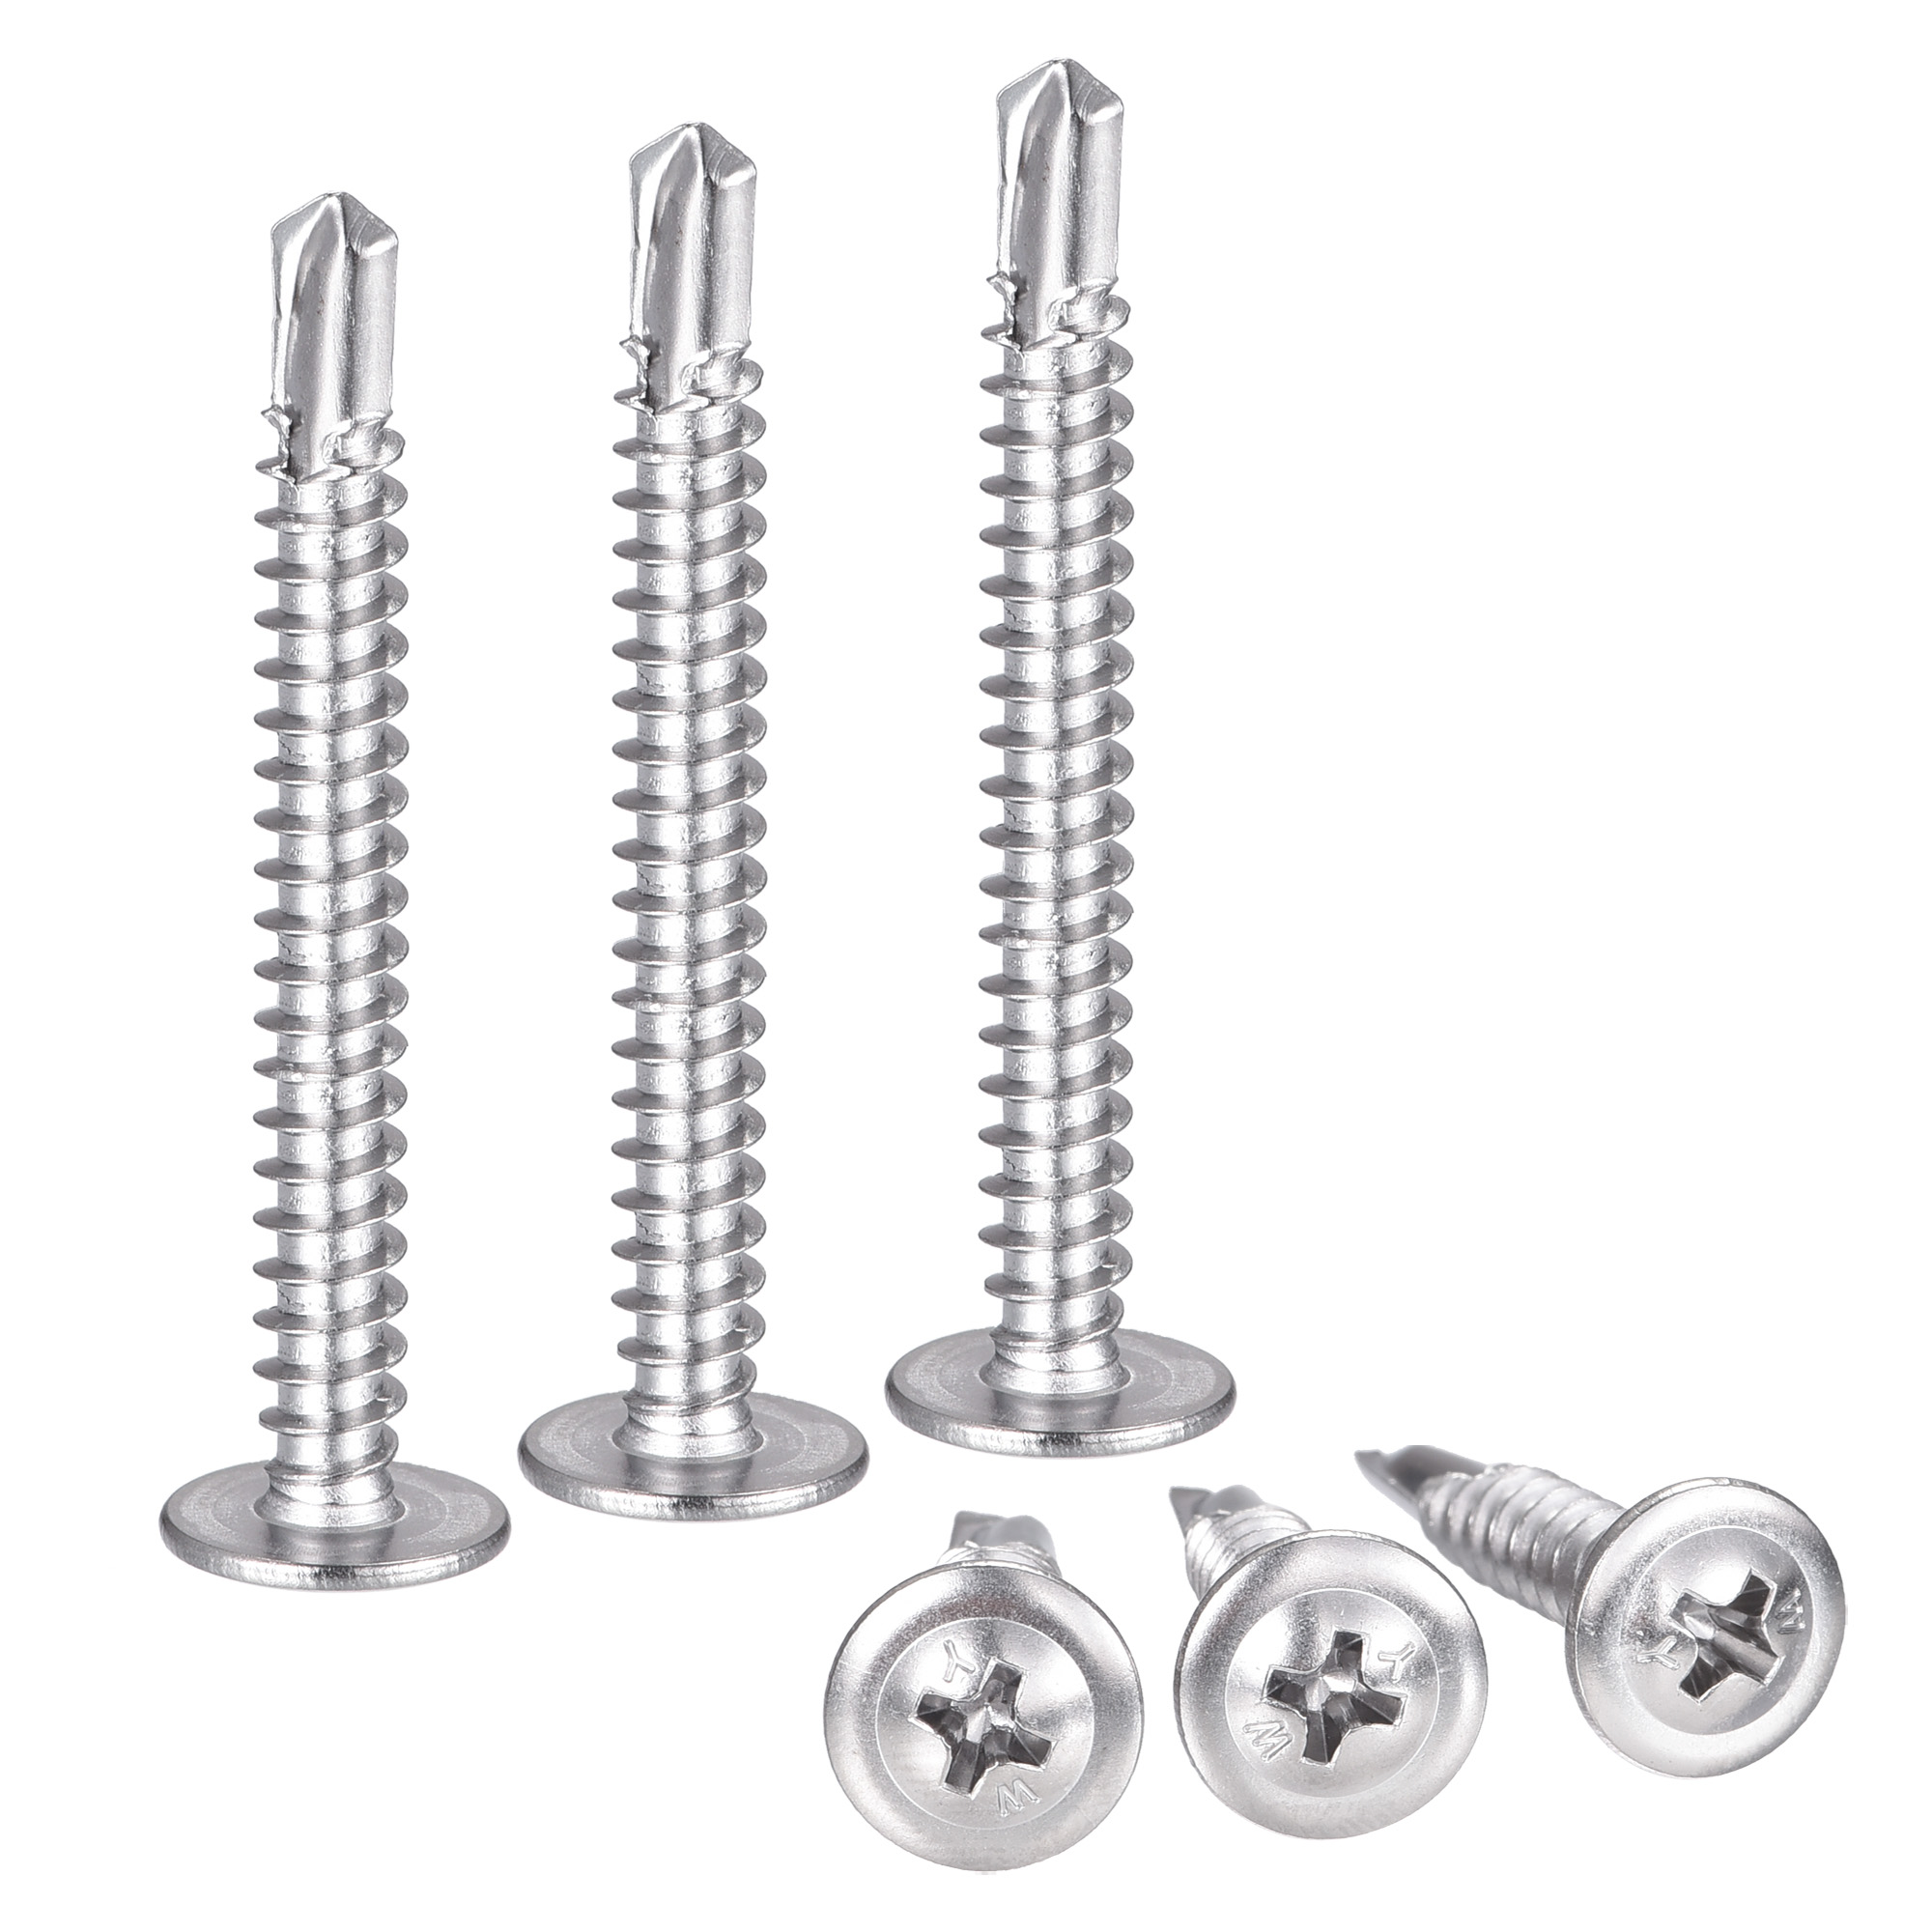 Uxcell #10 x 1-3/4" 410 Stainless Steel Phillips Head Self Tapping Screws  100 Pack